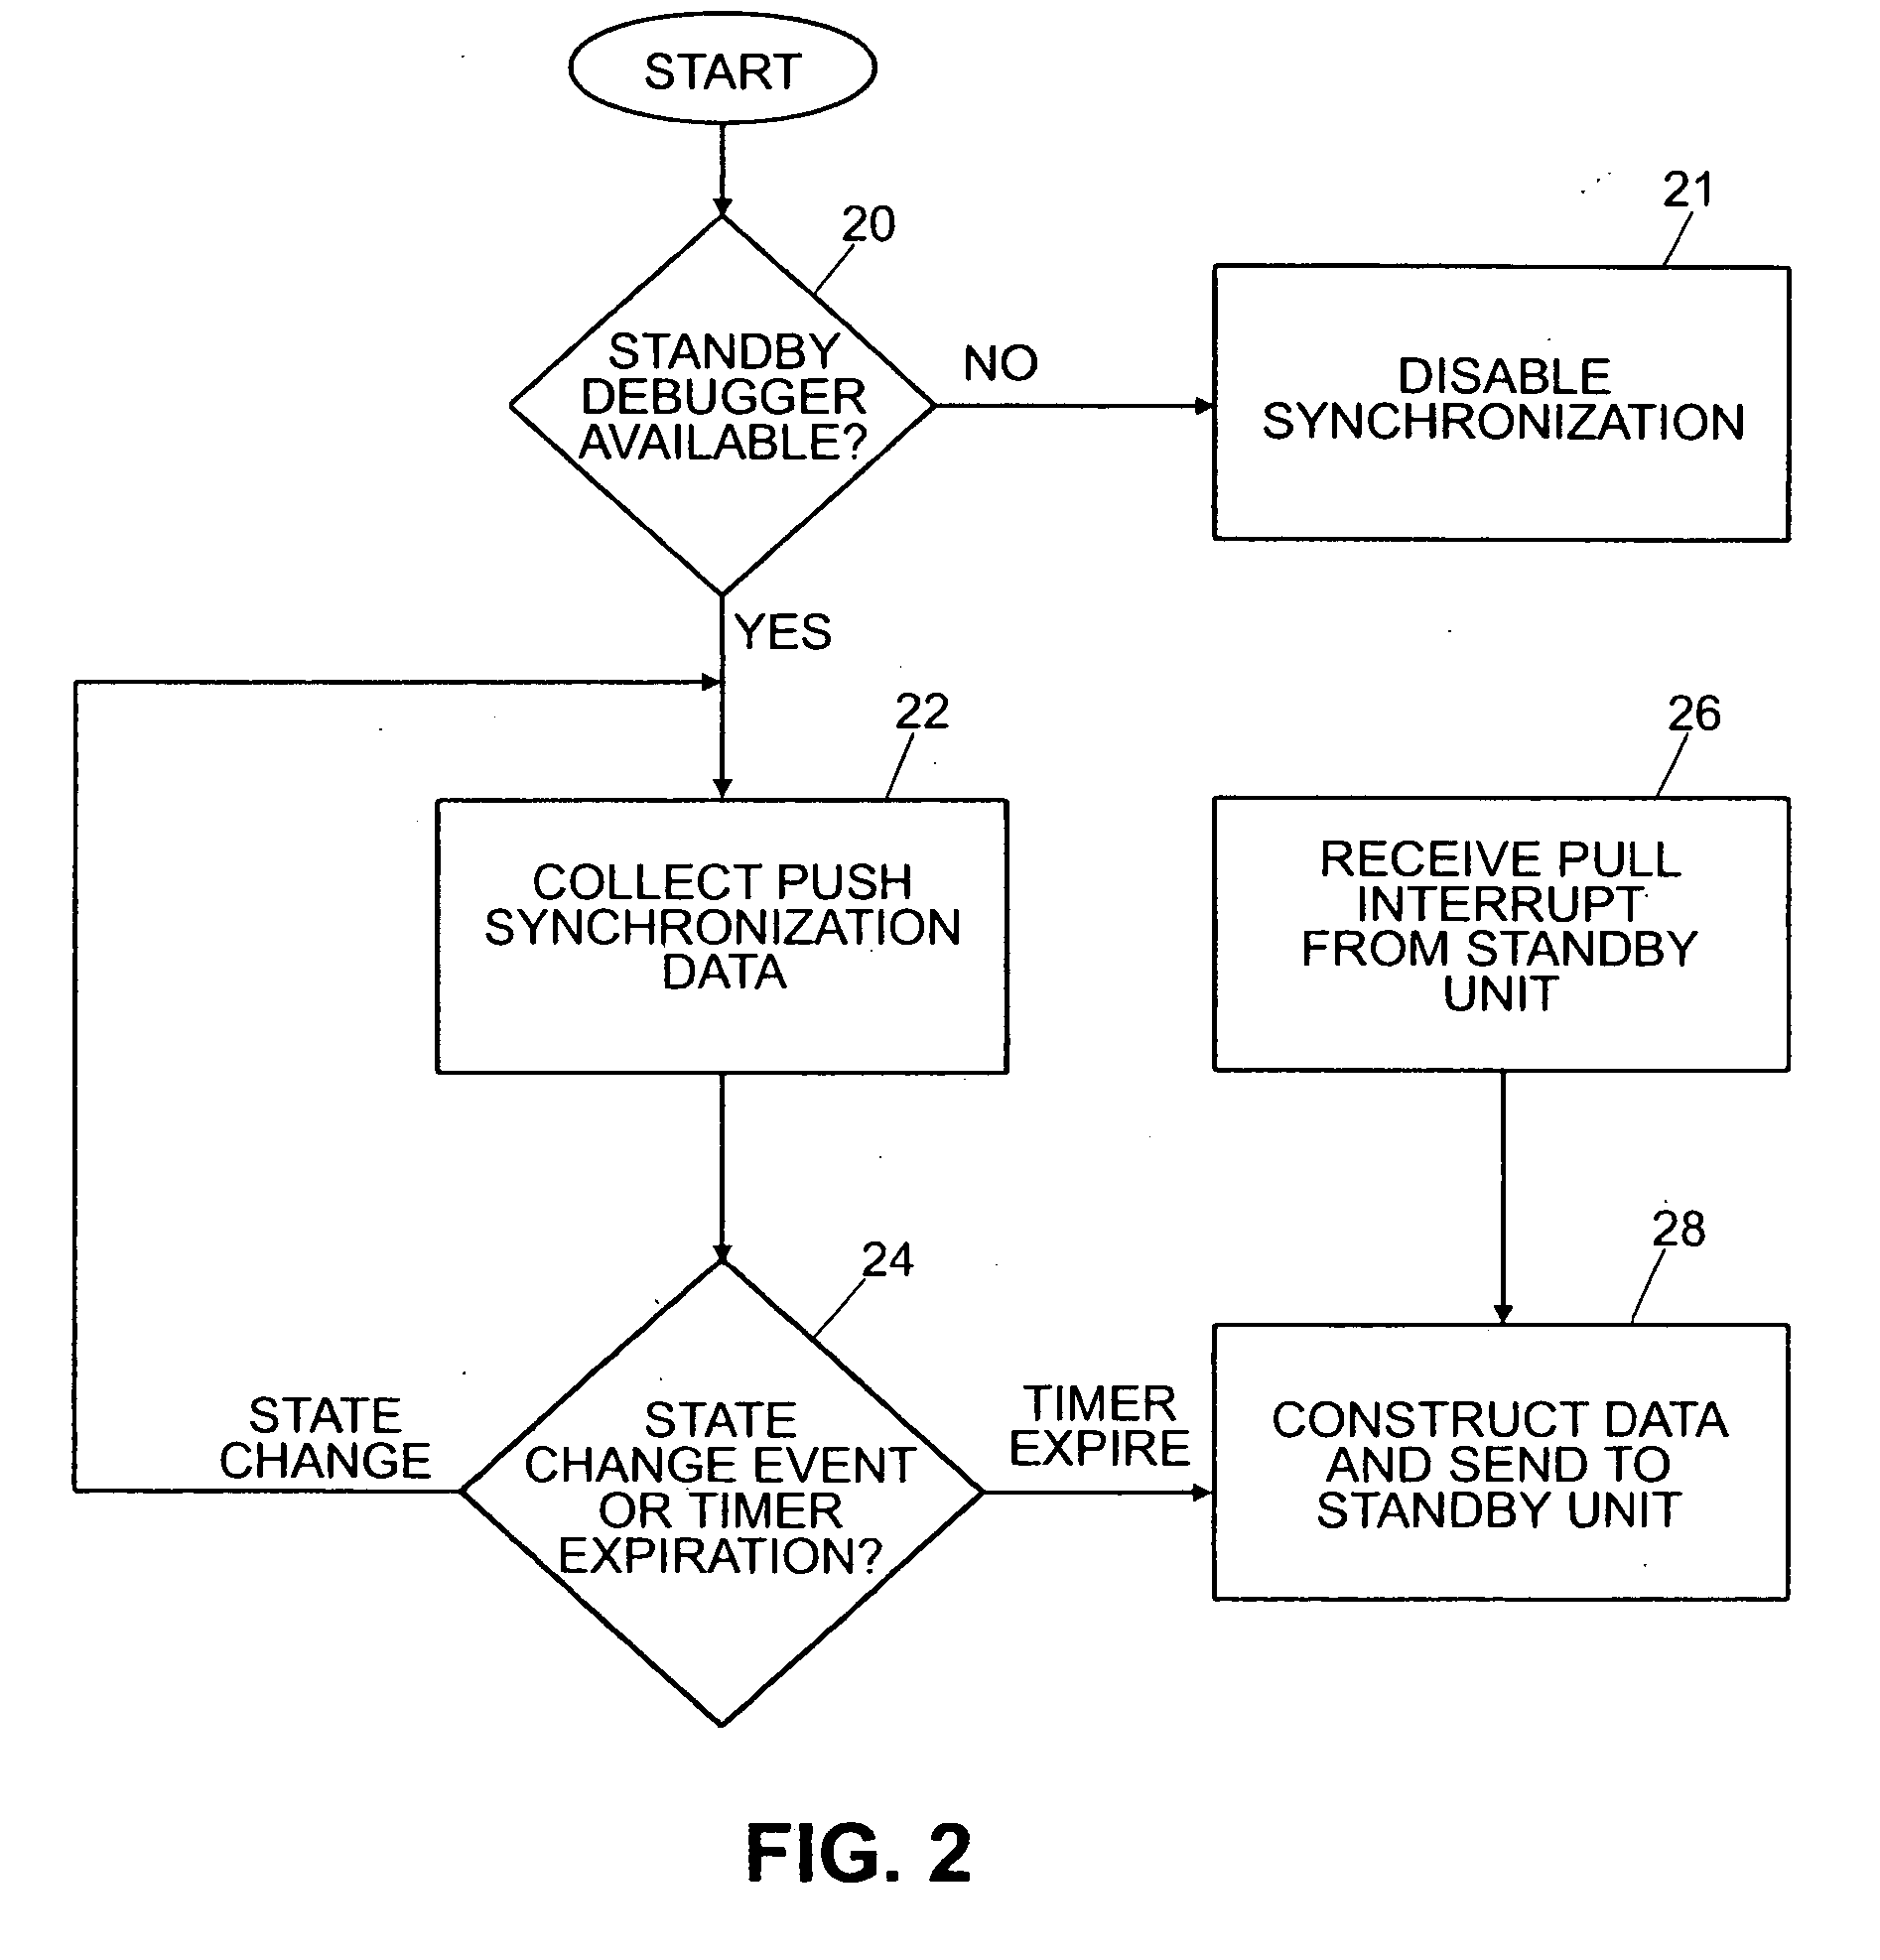 Method of debugging "active" unit using "non-intrusive source-level debugger" on "standby" unit of high availability system